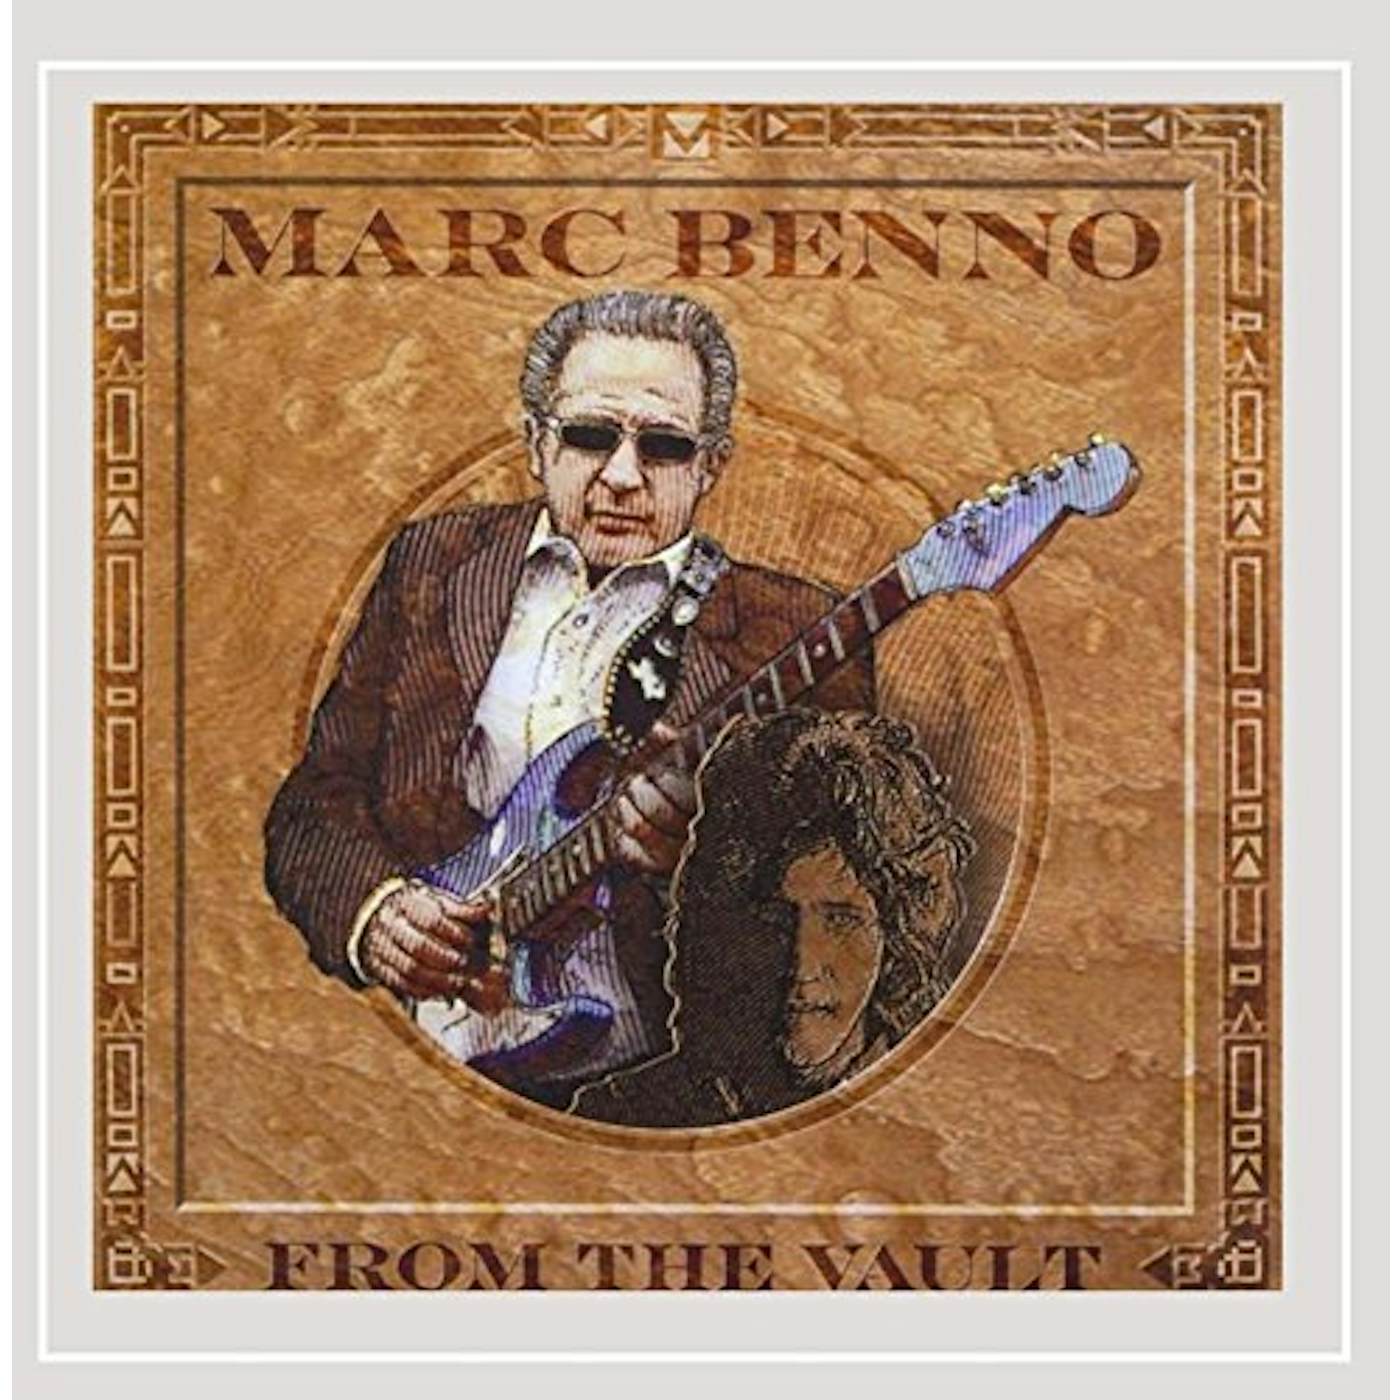 Marc Benno FROM THE VAULT CD